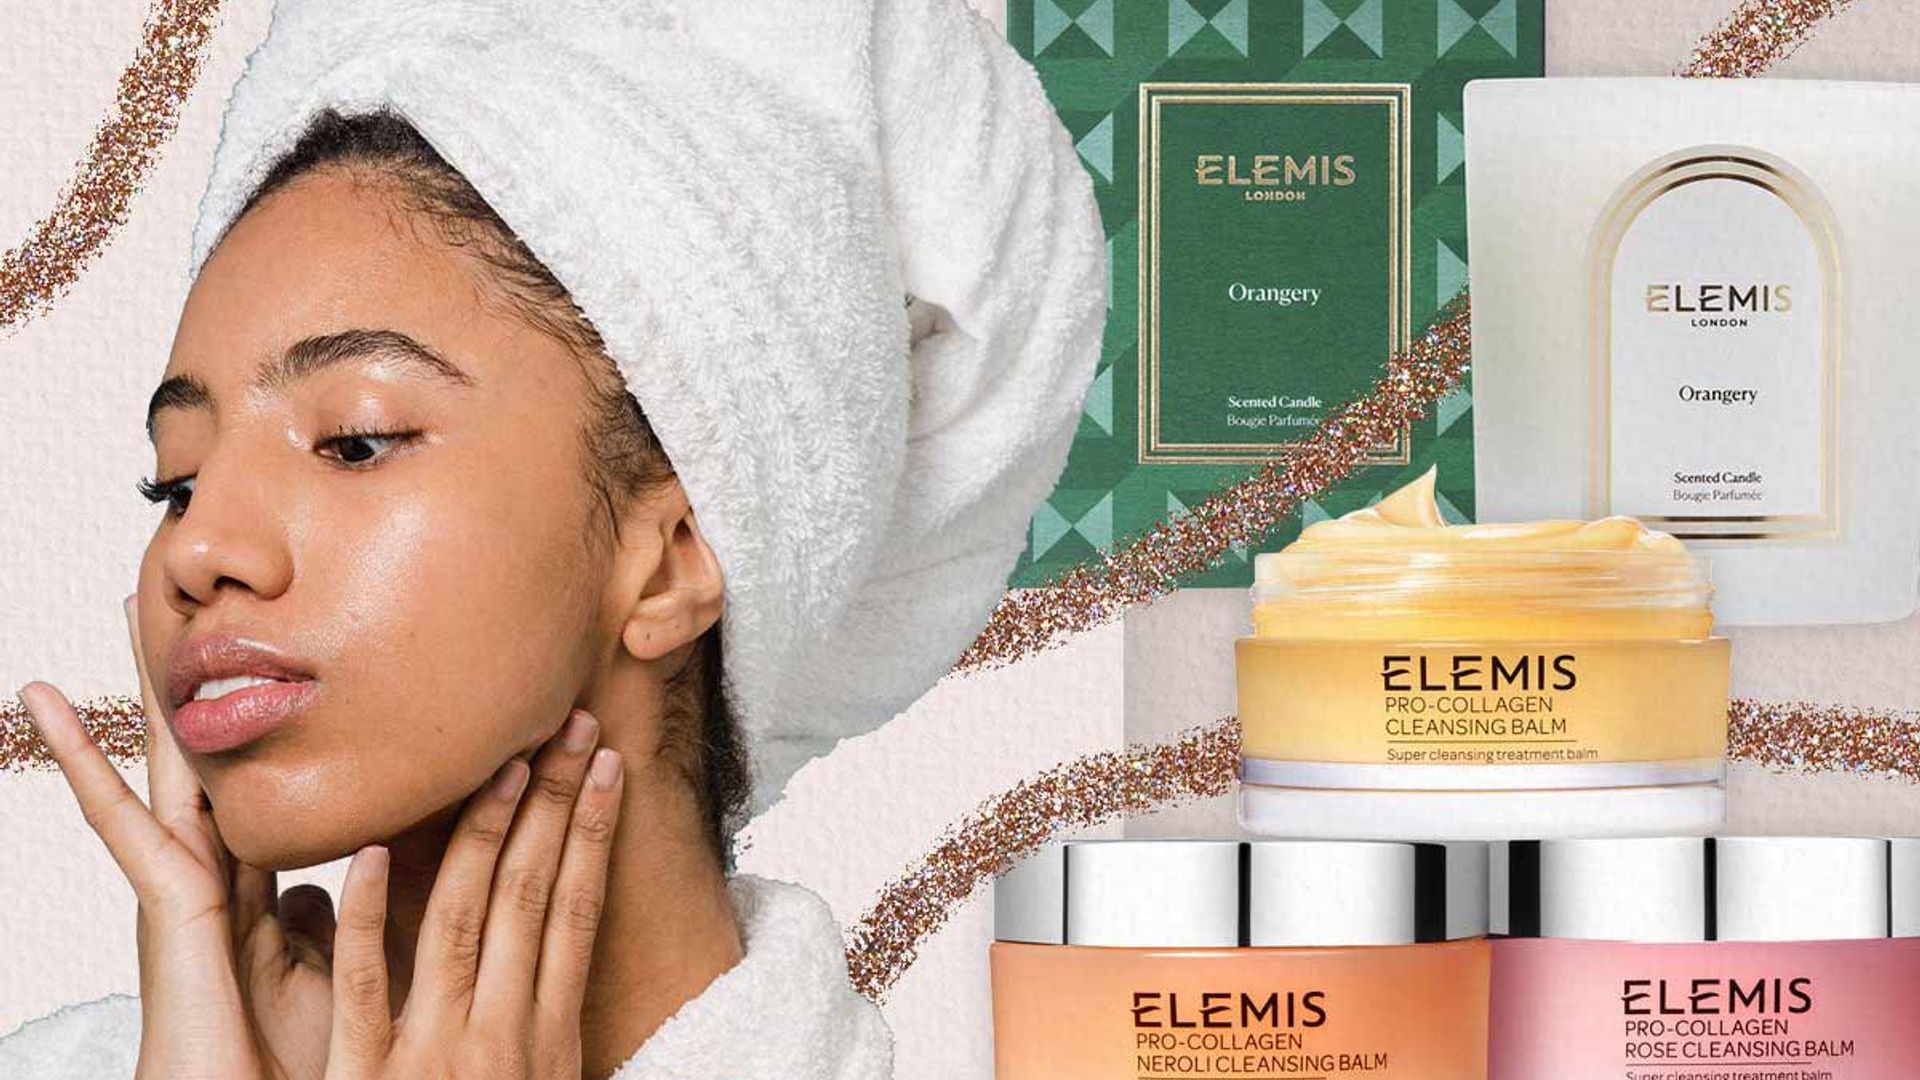 Elemis Christmas gifts are always a winner - 9 perfect picks under £100